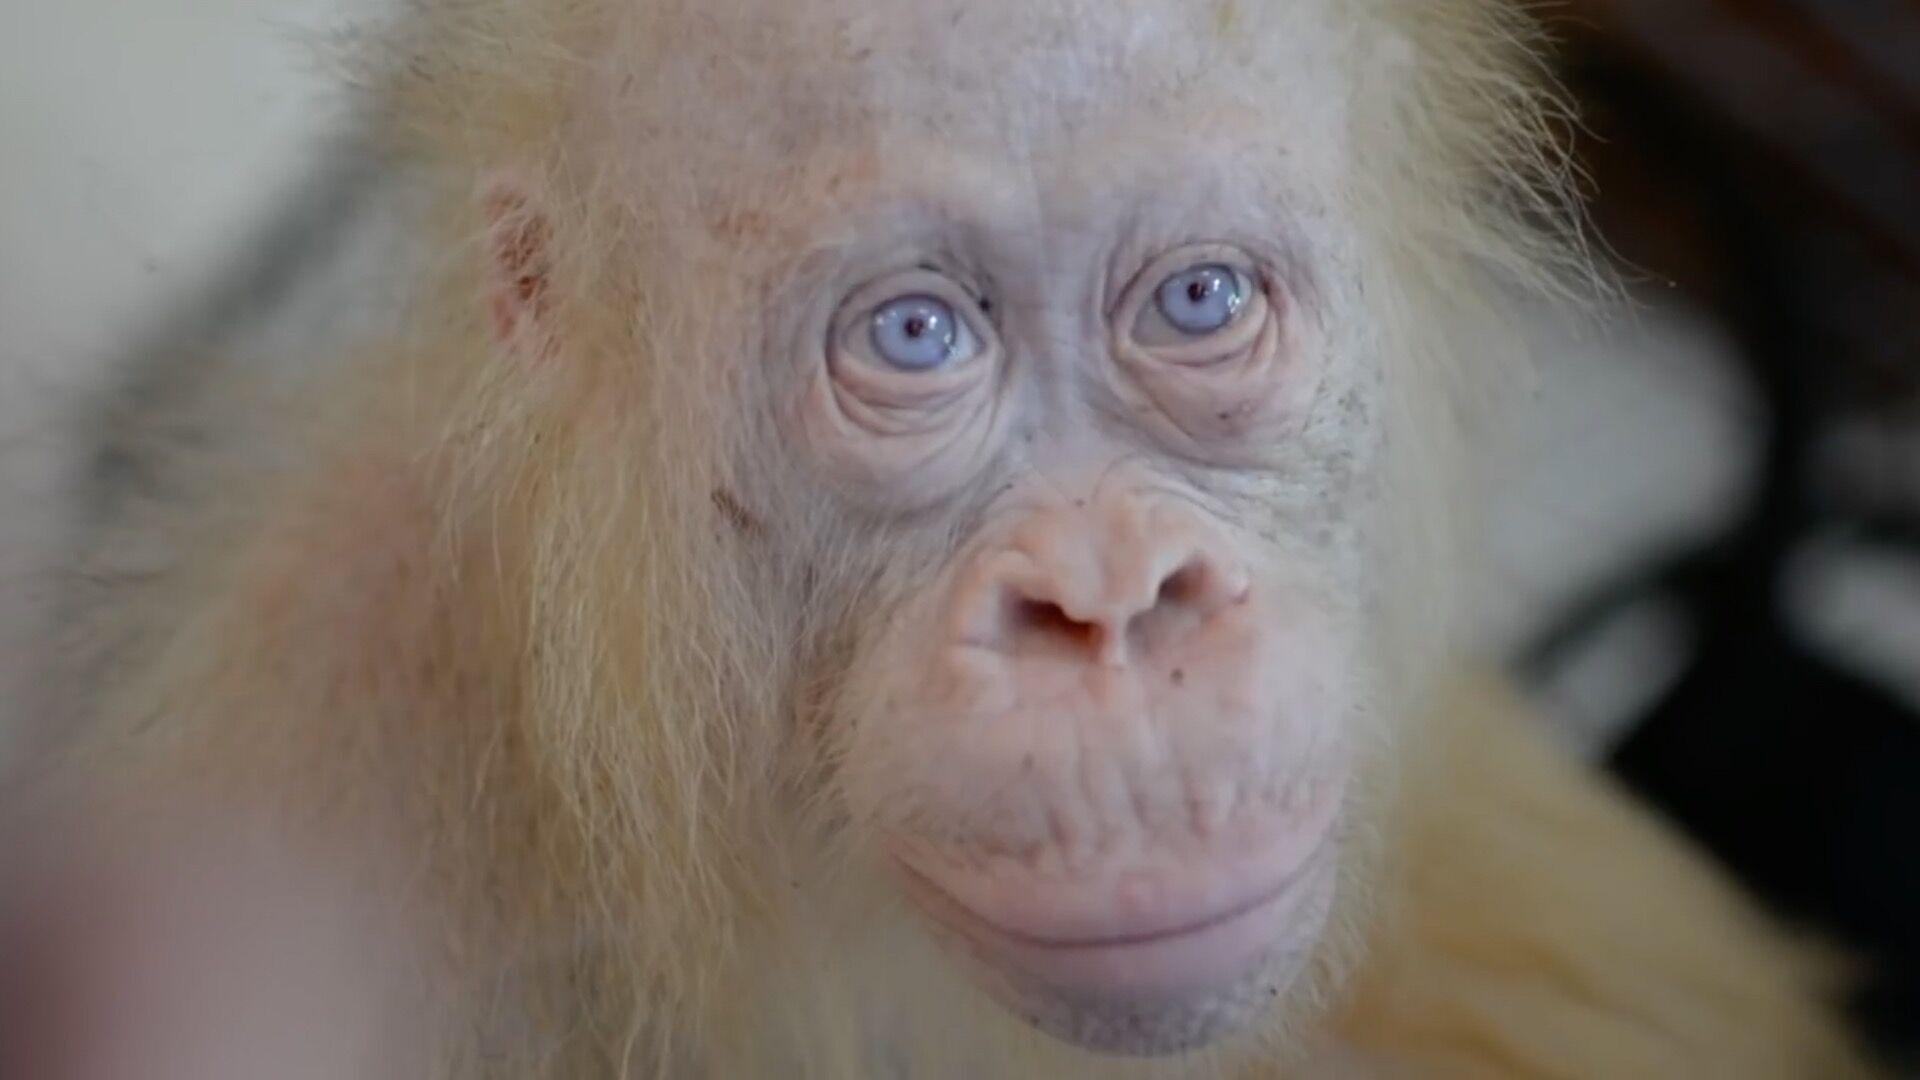 This is the world's only known albino orangutan